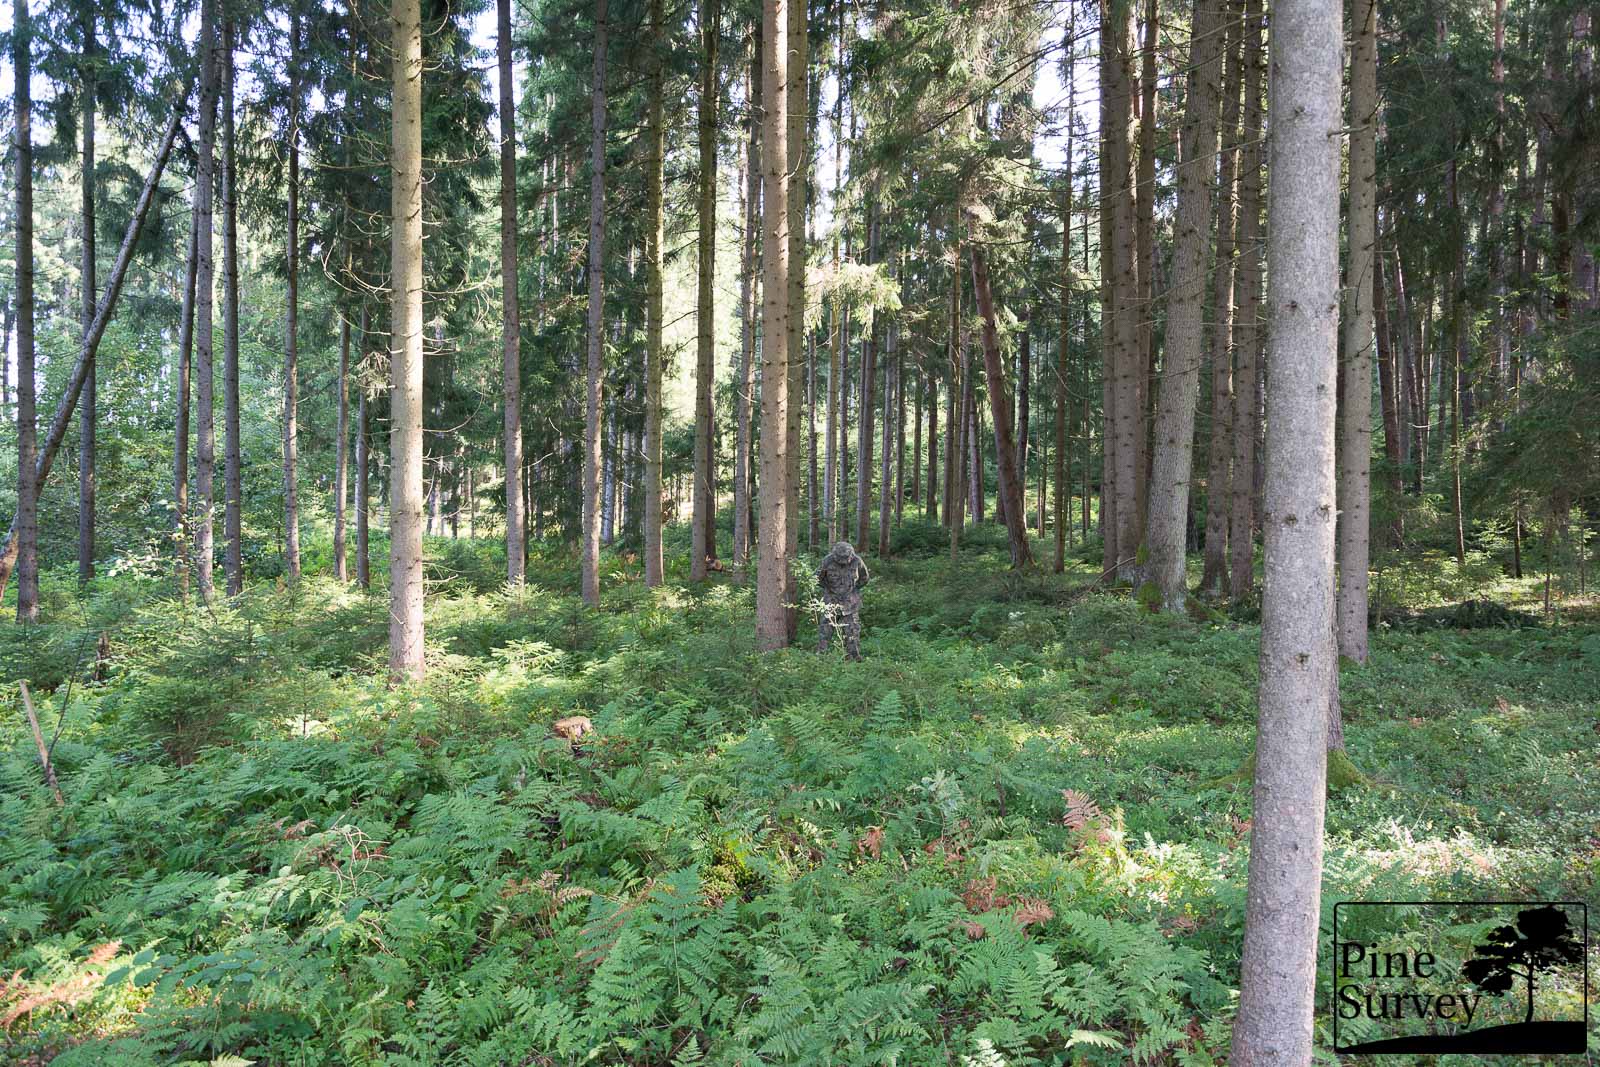 PL Woodland (wz93) - standing position, wide angle